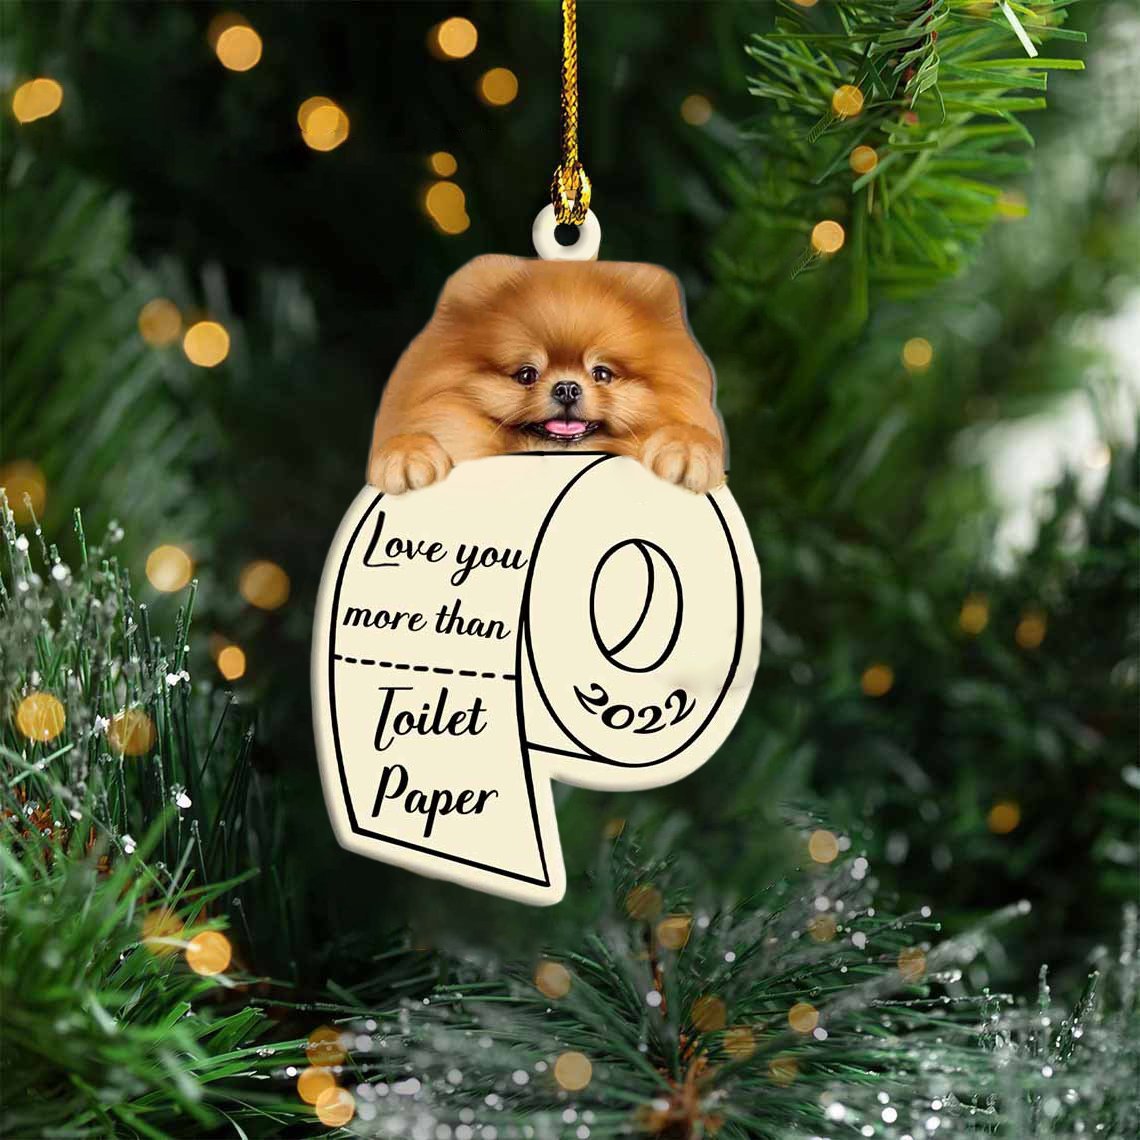 Pomeranian Love You More Than Toilet Paper 2022 Hanging Ornament